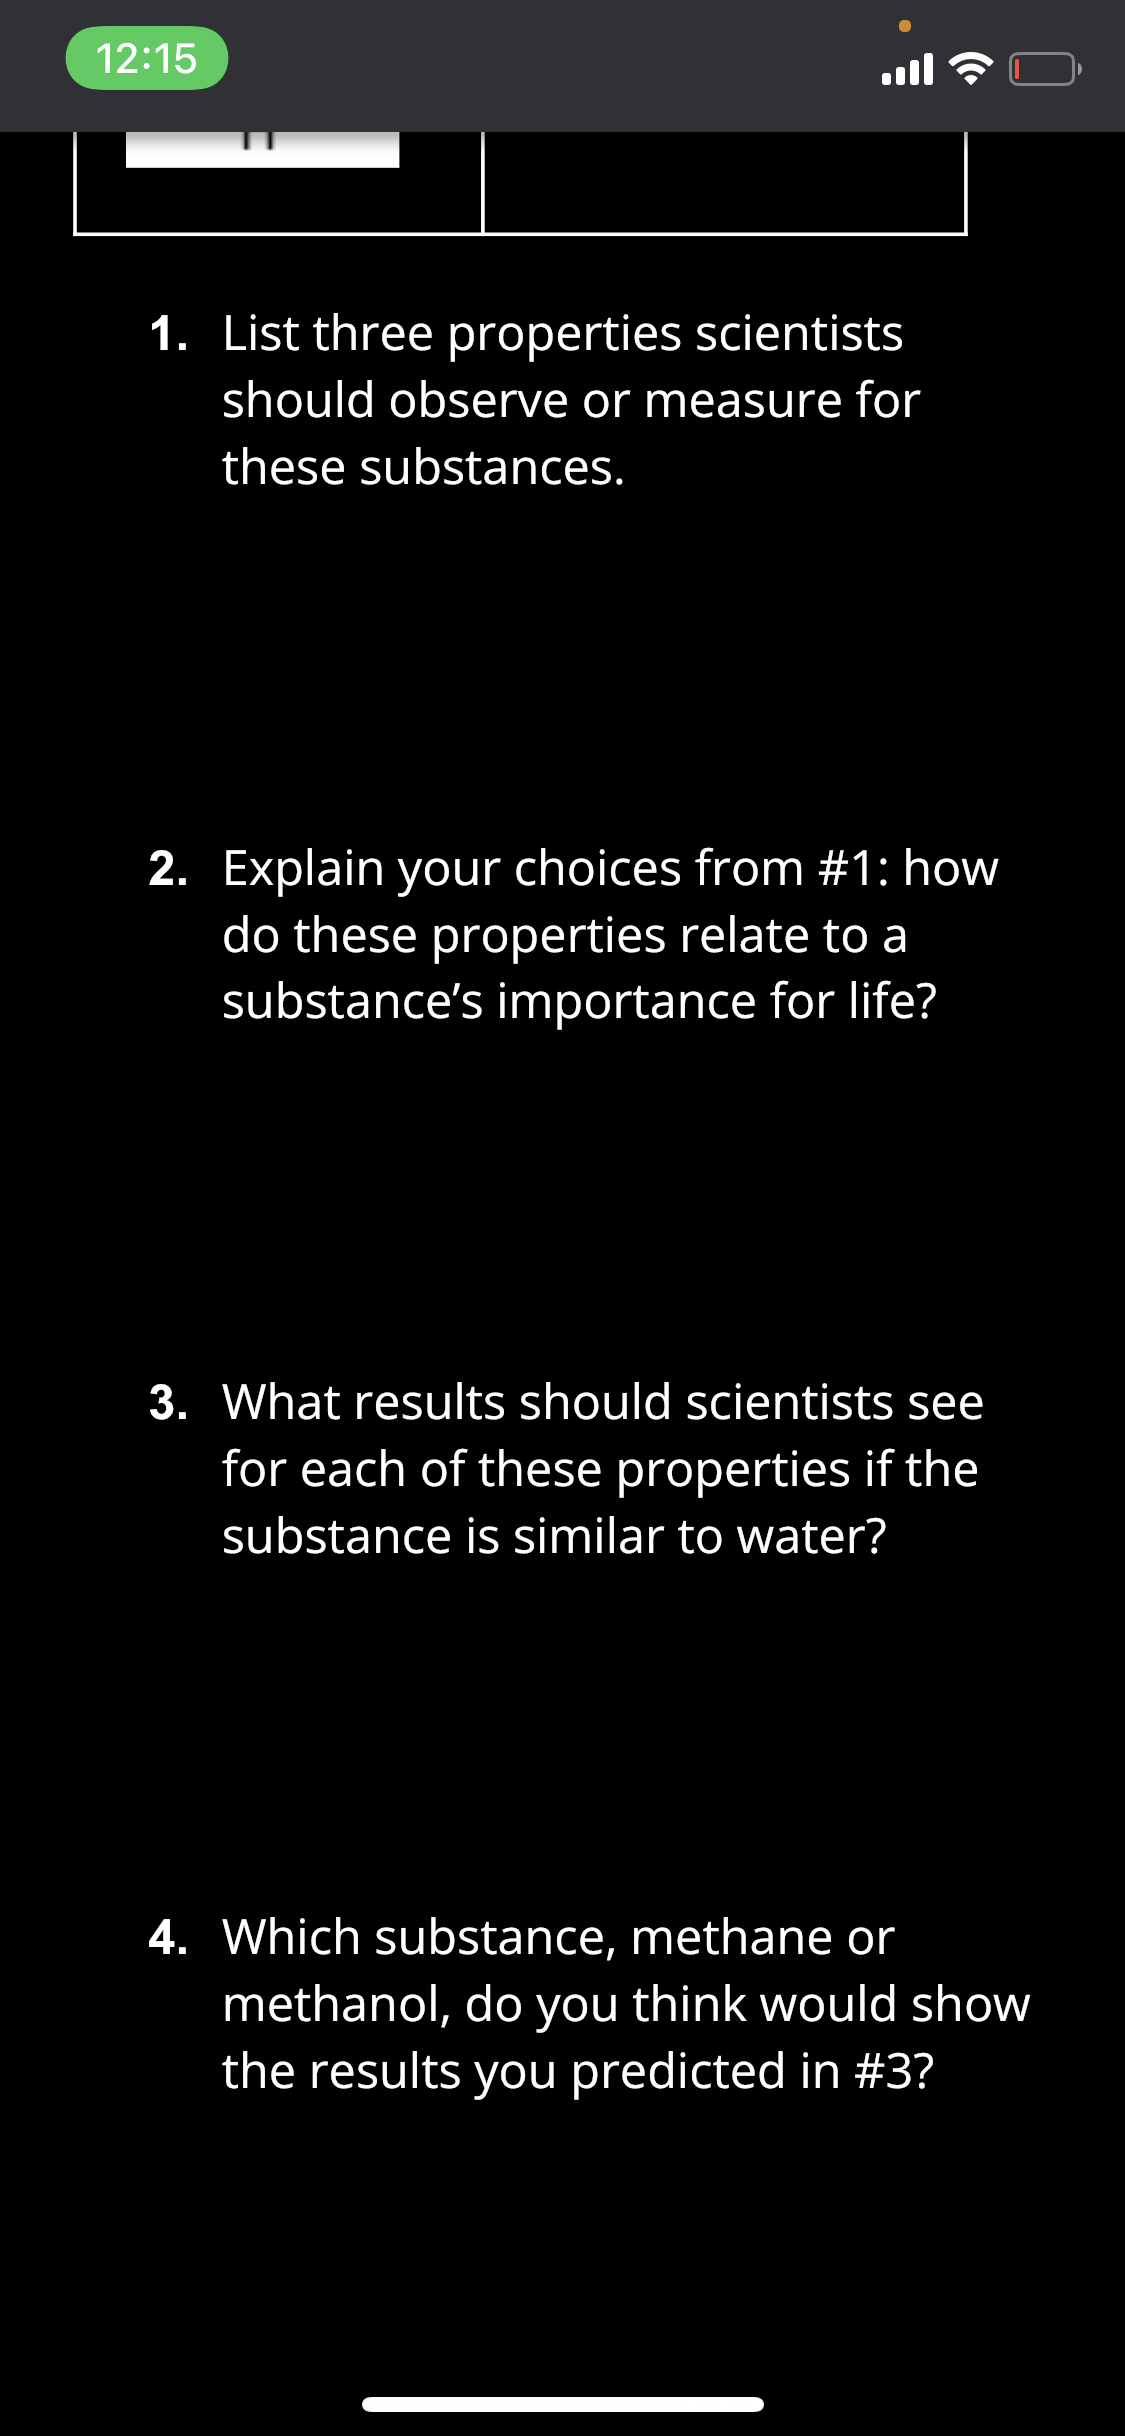 12:15
ull
1. List three properties scientists
should observe or measure for
these substances.
2. Explain your choices from #1: how
do these properties relate to a
substance's importance for life?
3. What results should scientists see
for each of these properties if the
substance is similar to water?
4. Which substance, methane or
methanol, do you think would show
the results you predicted in #3?
